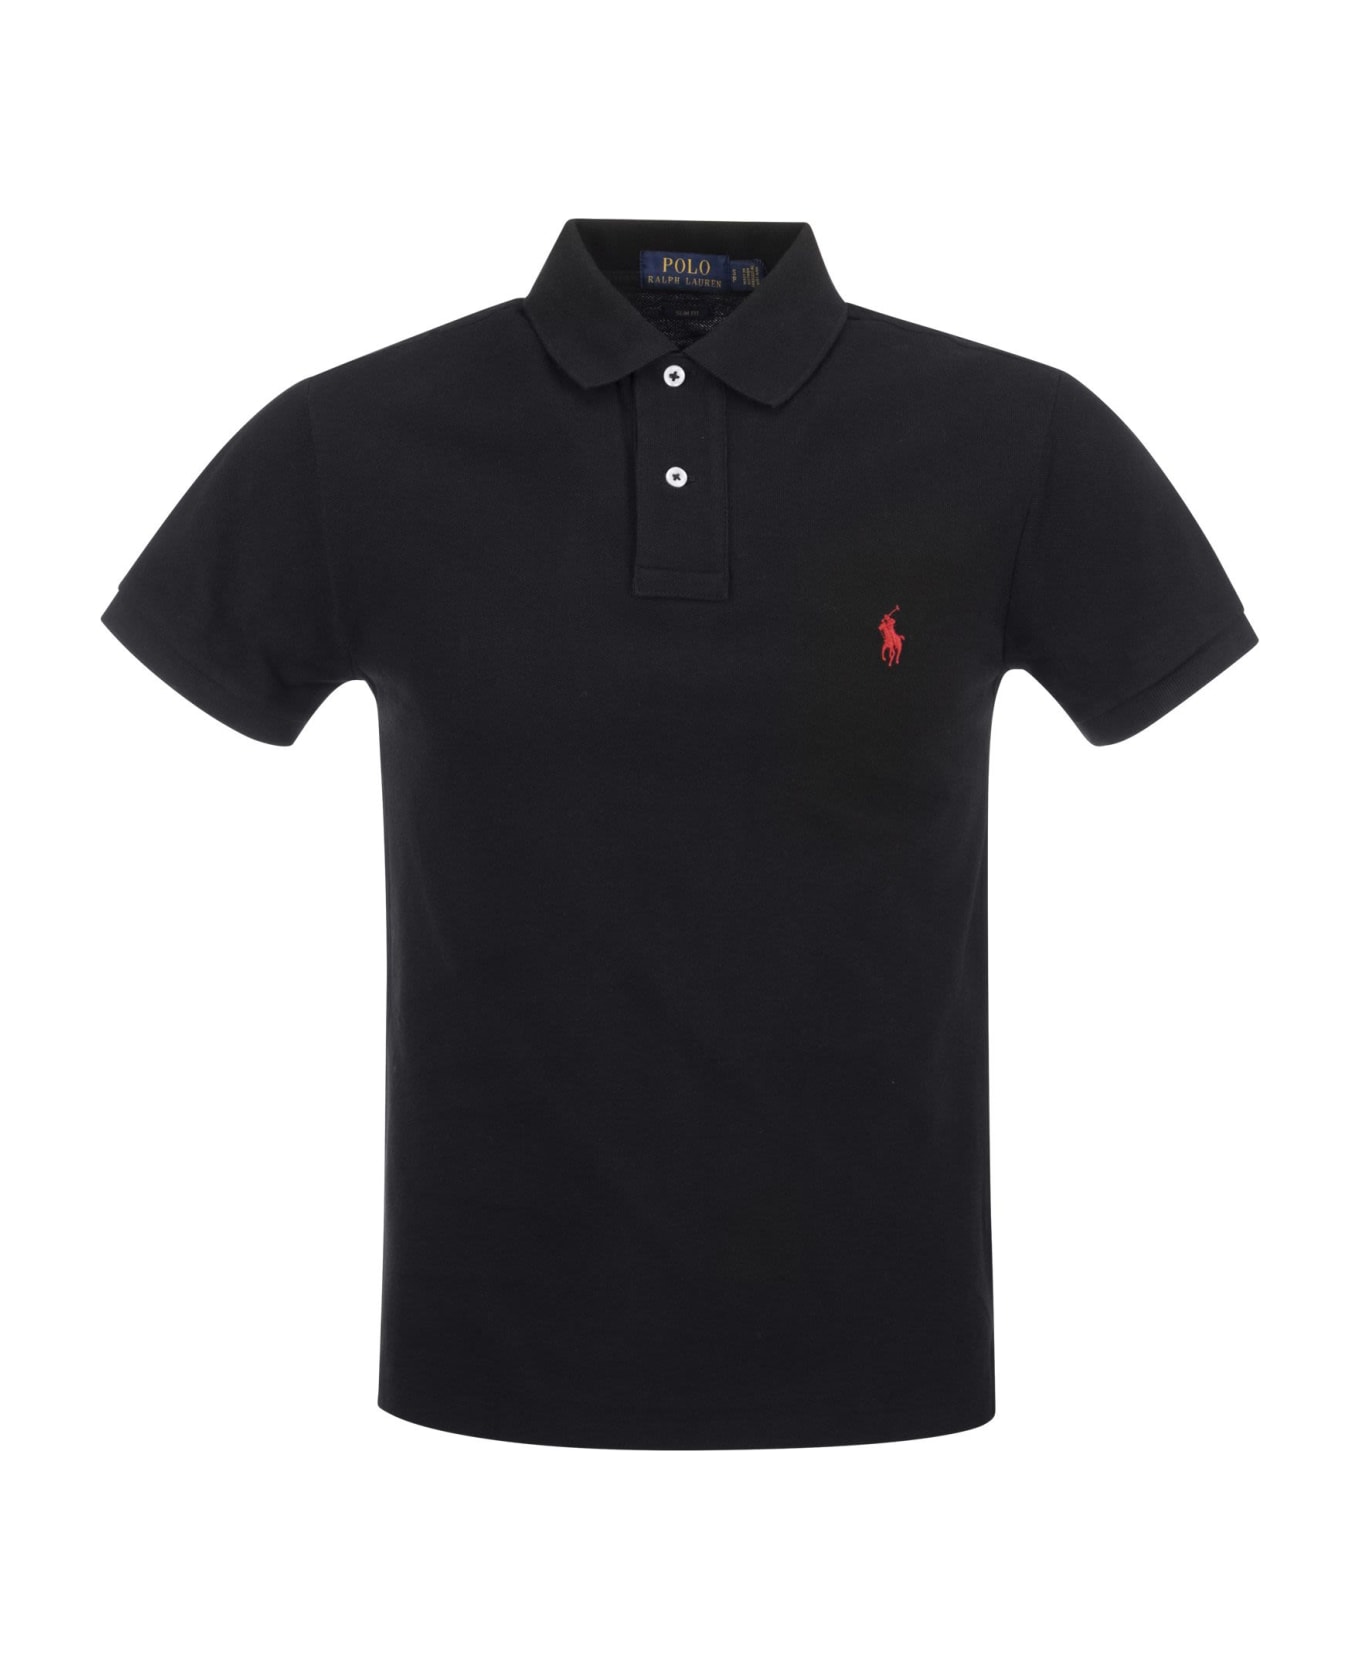 Polo Ralph Lauren Black And Red Slim-fit Pique Polo Shirt - 006